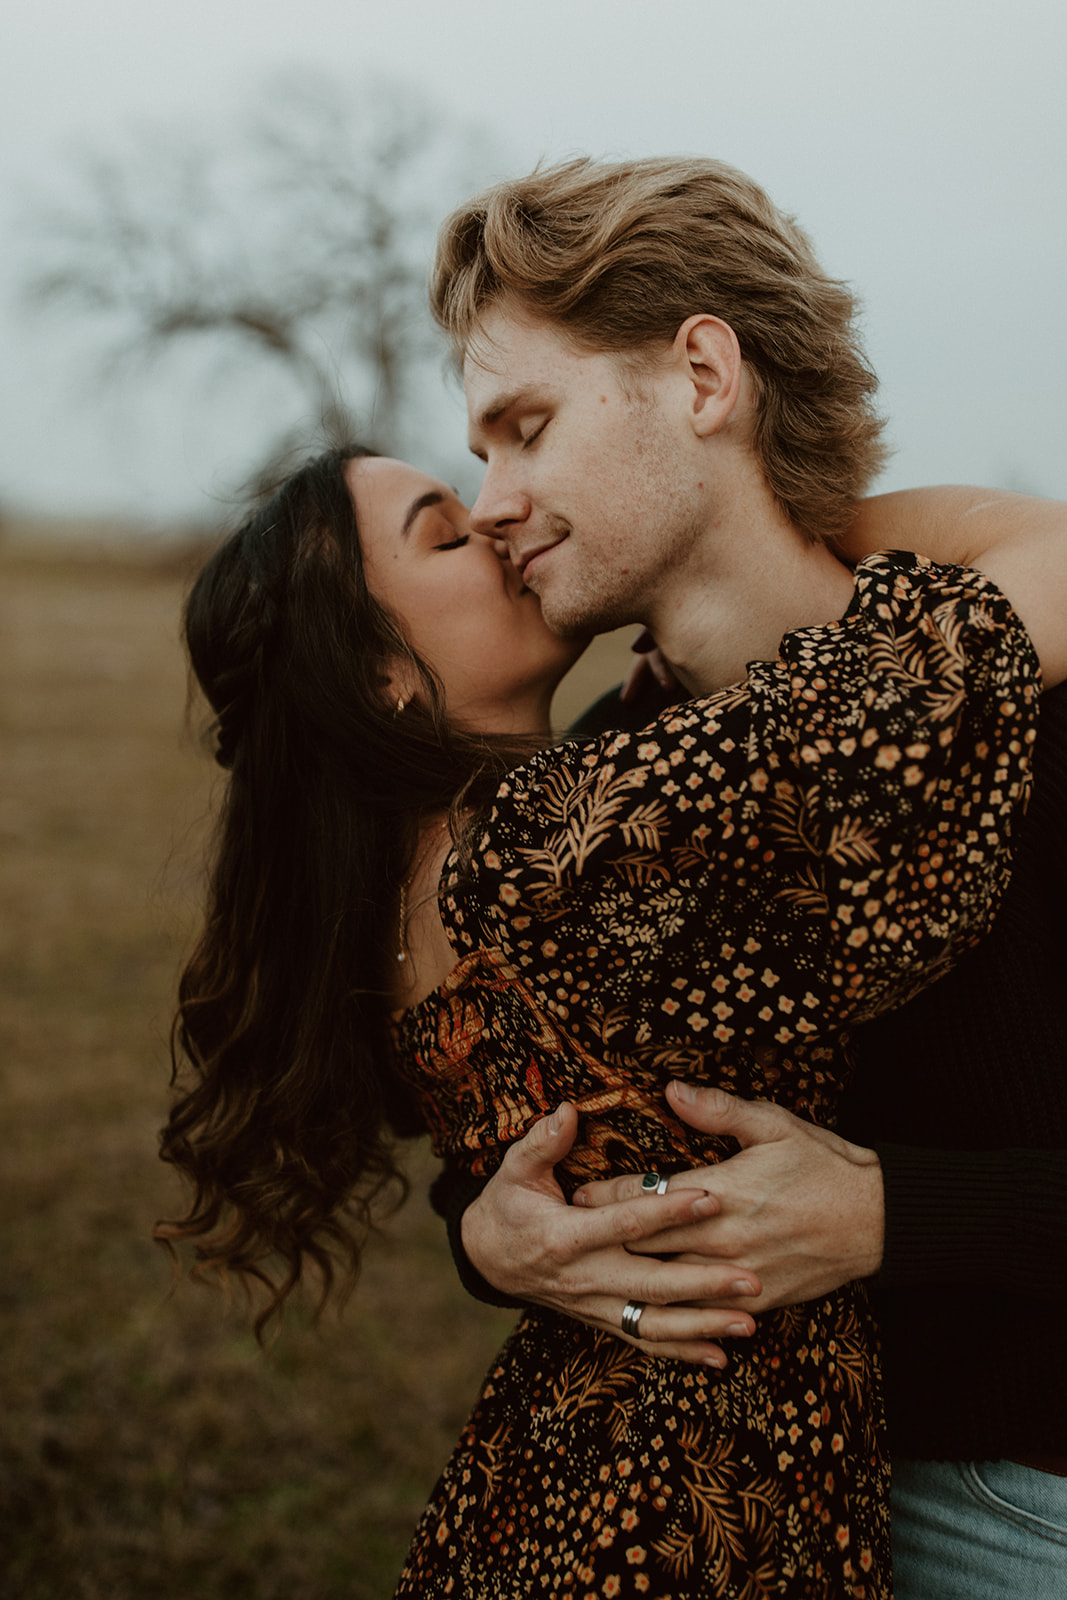 Complimentary engagement session in College Station, Texas